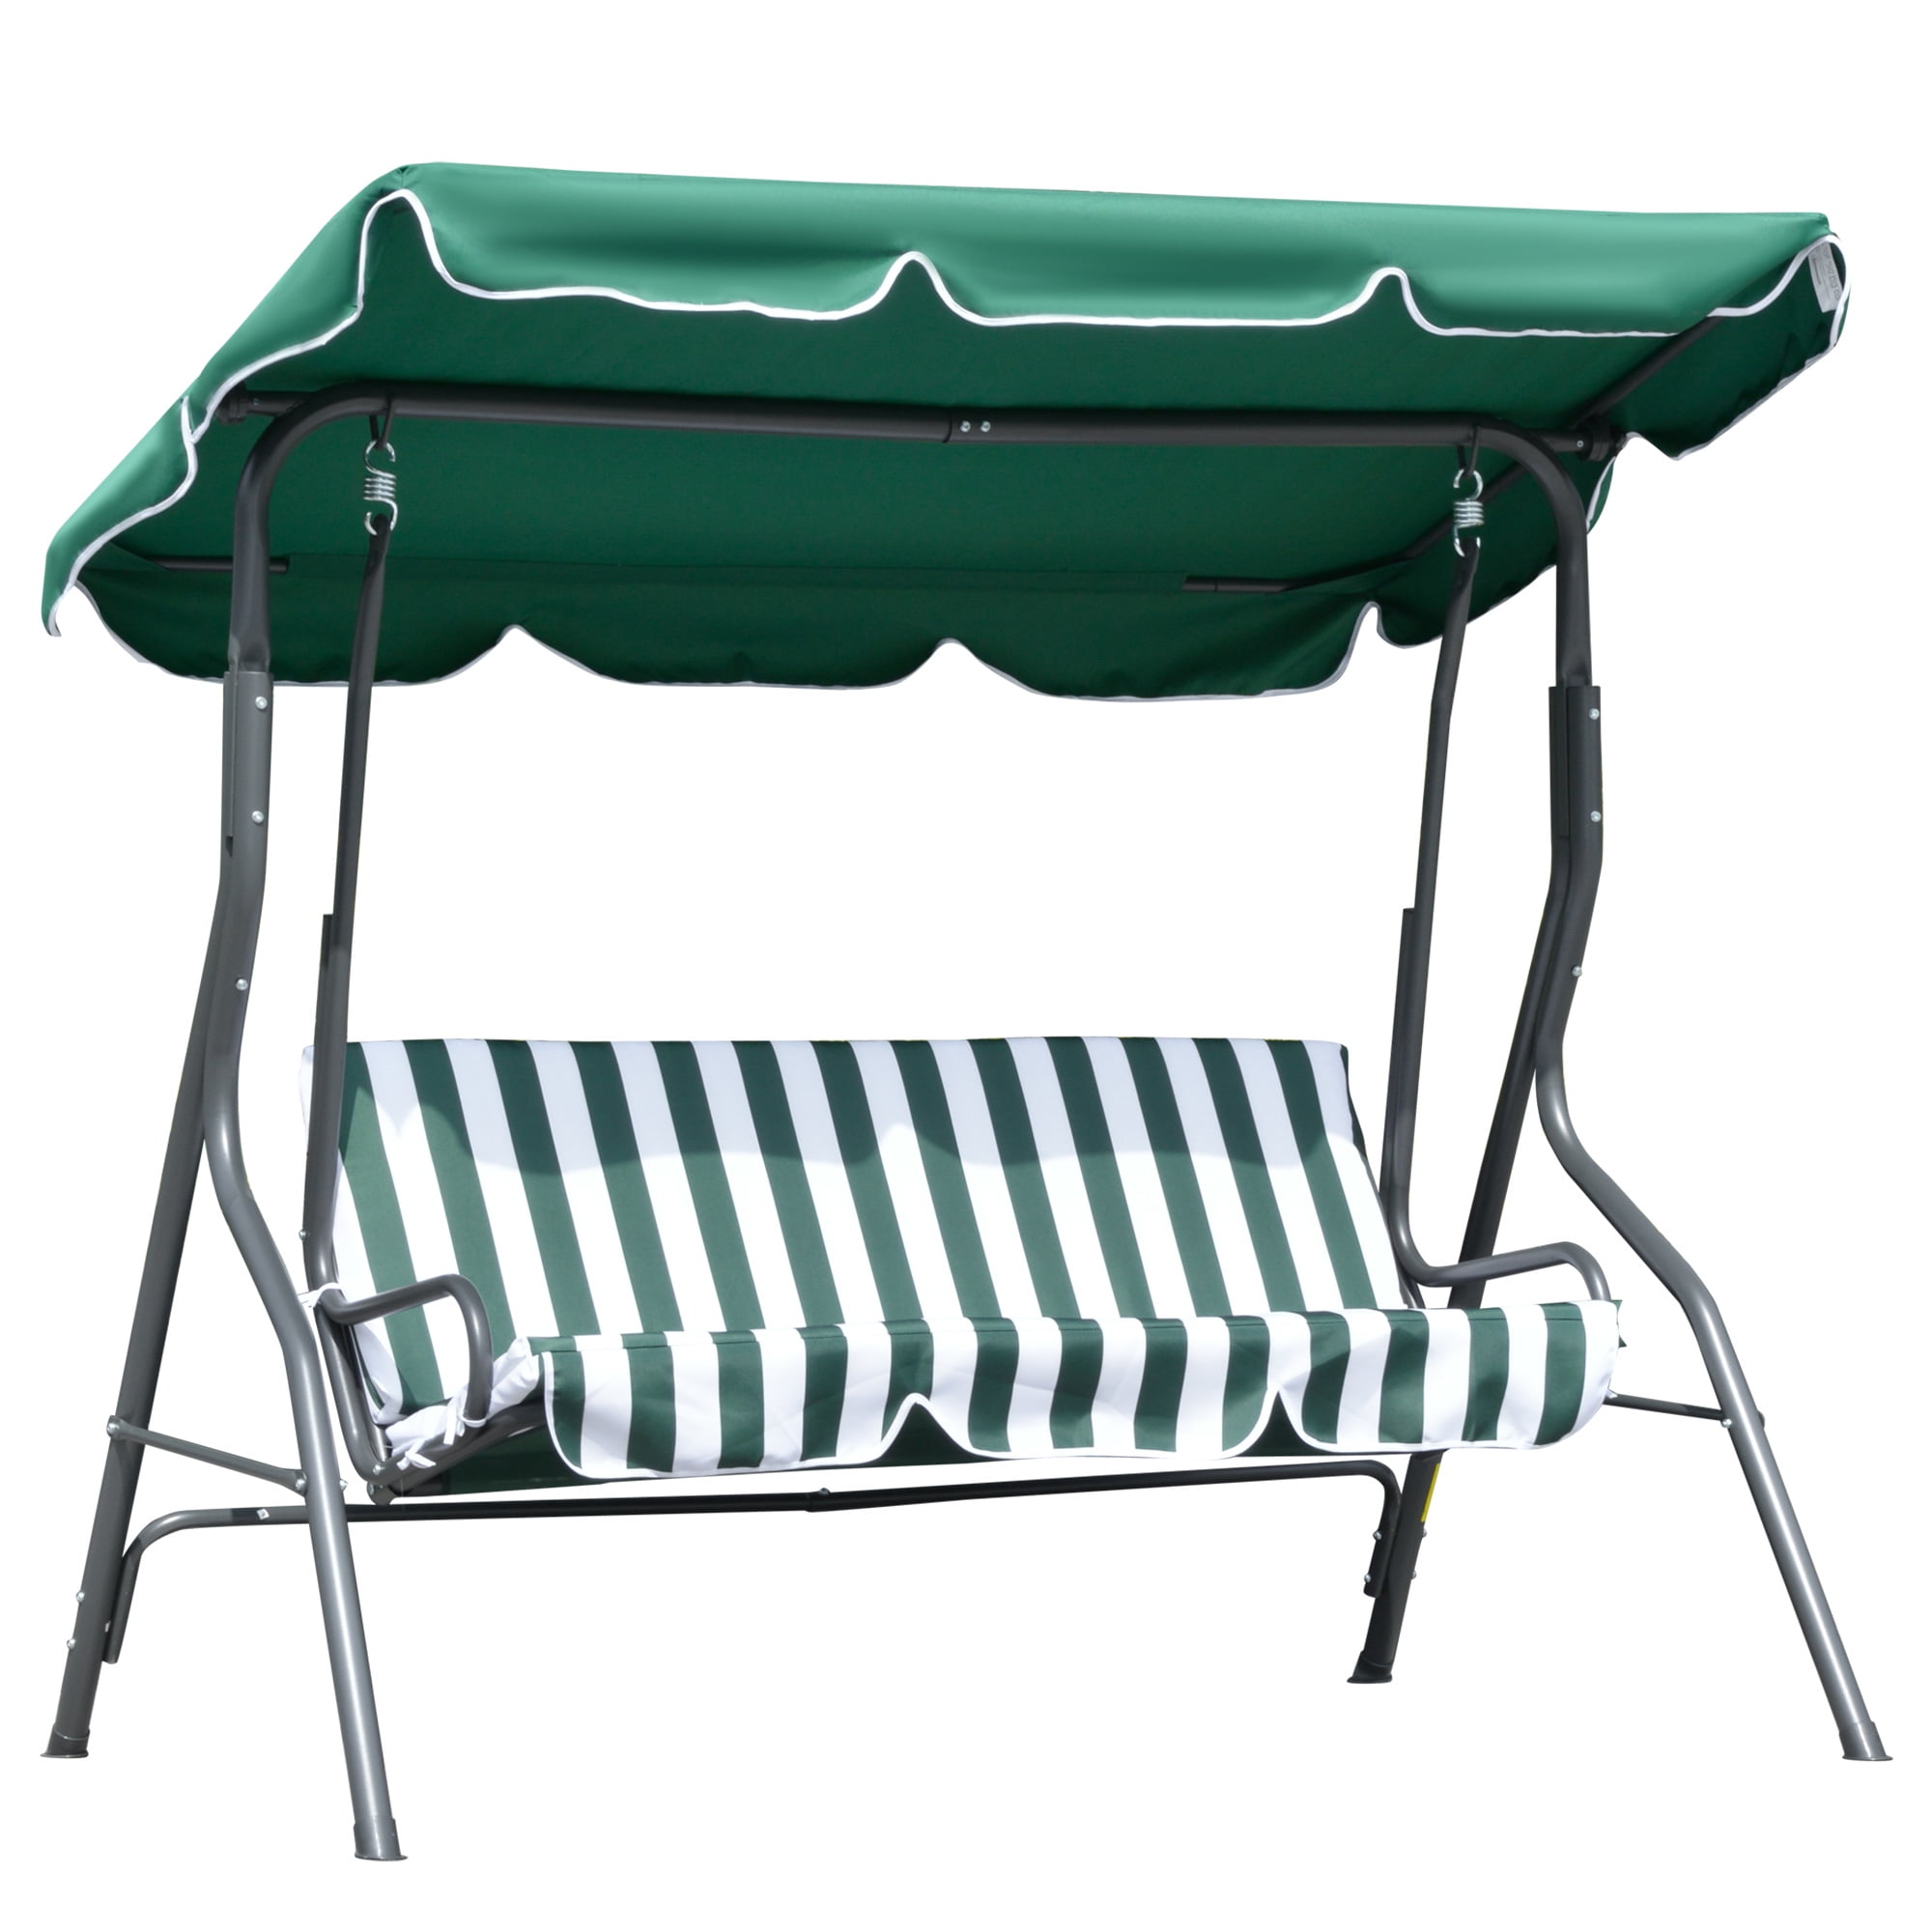 Details about   Patio Porch Swing Chair Canopy Outdoor Lounge 3-Person Seat Hang Bench Hammock 